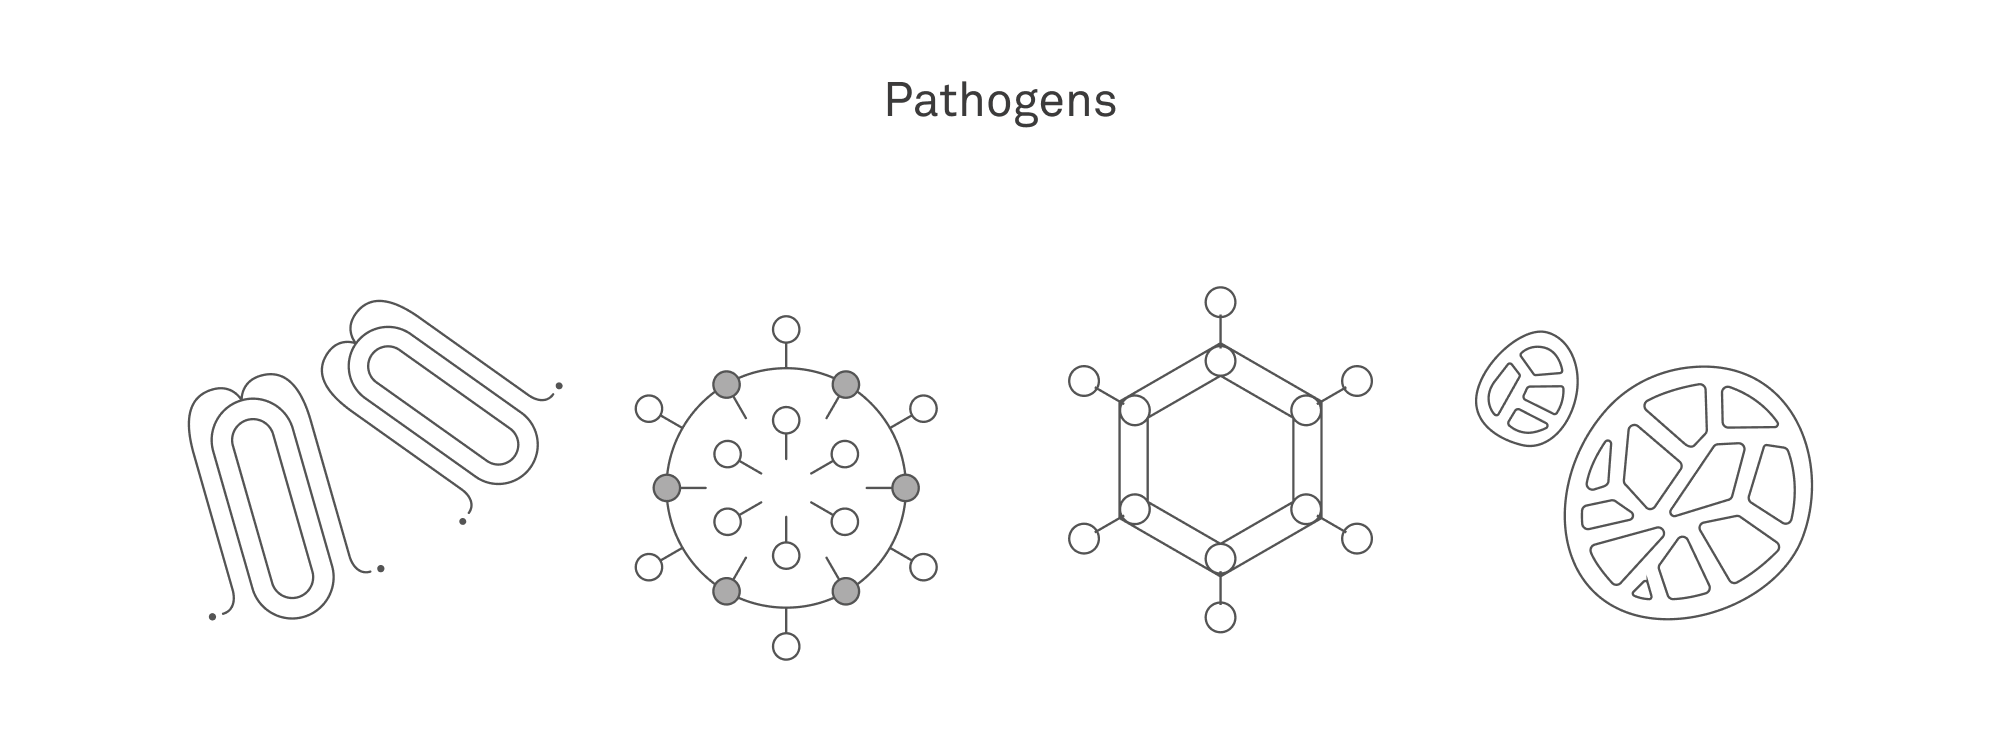 Vector art of pathogens such as viruses and bacteria